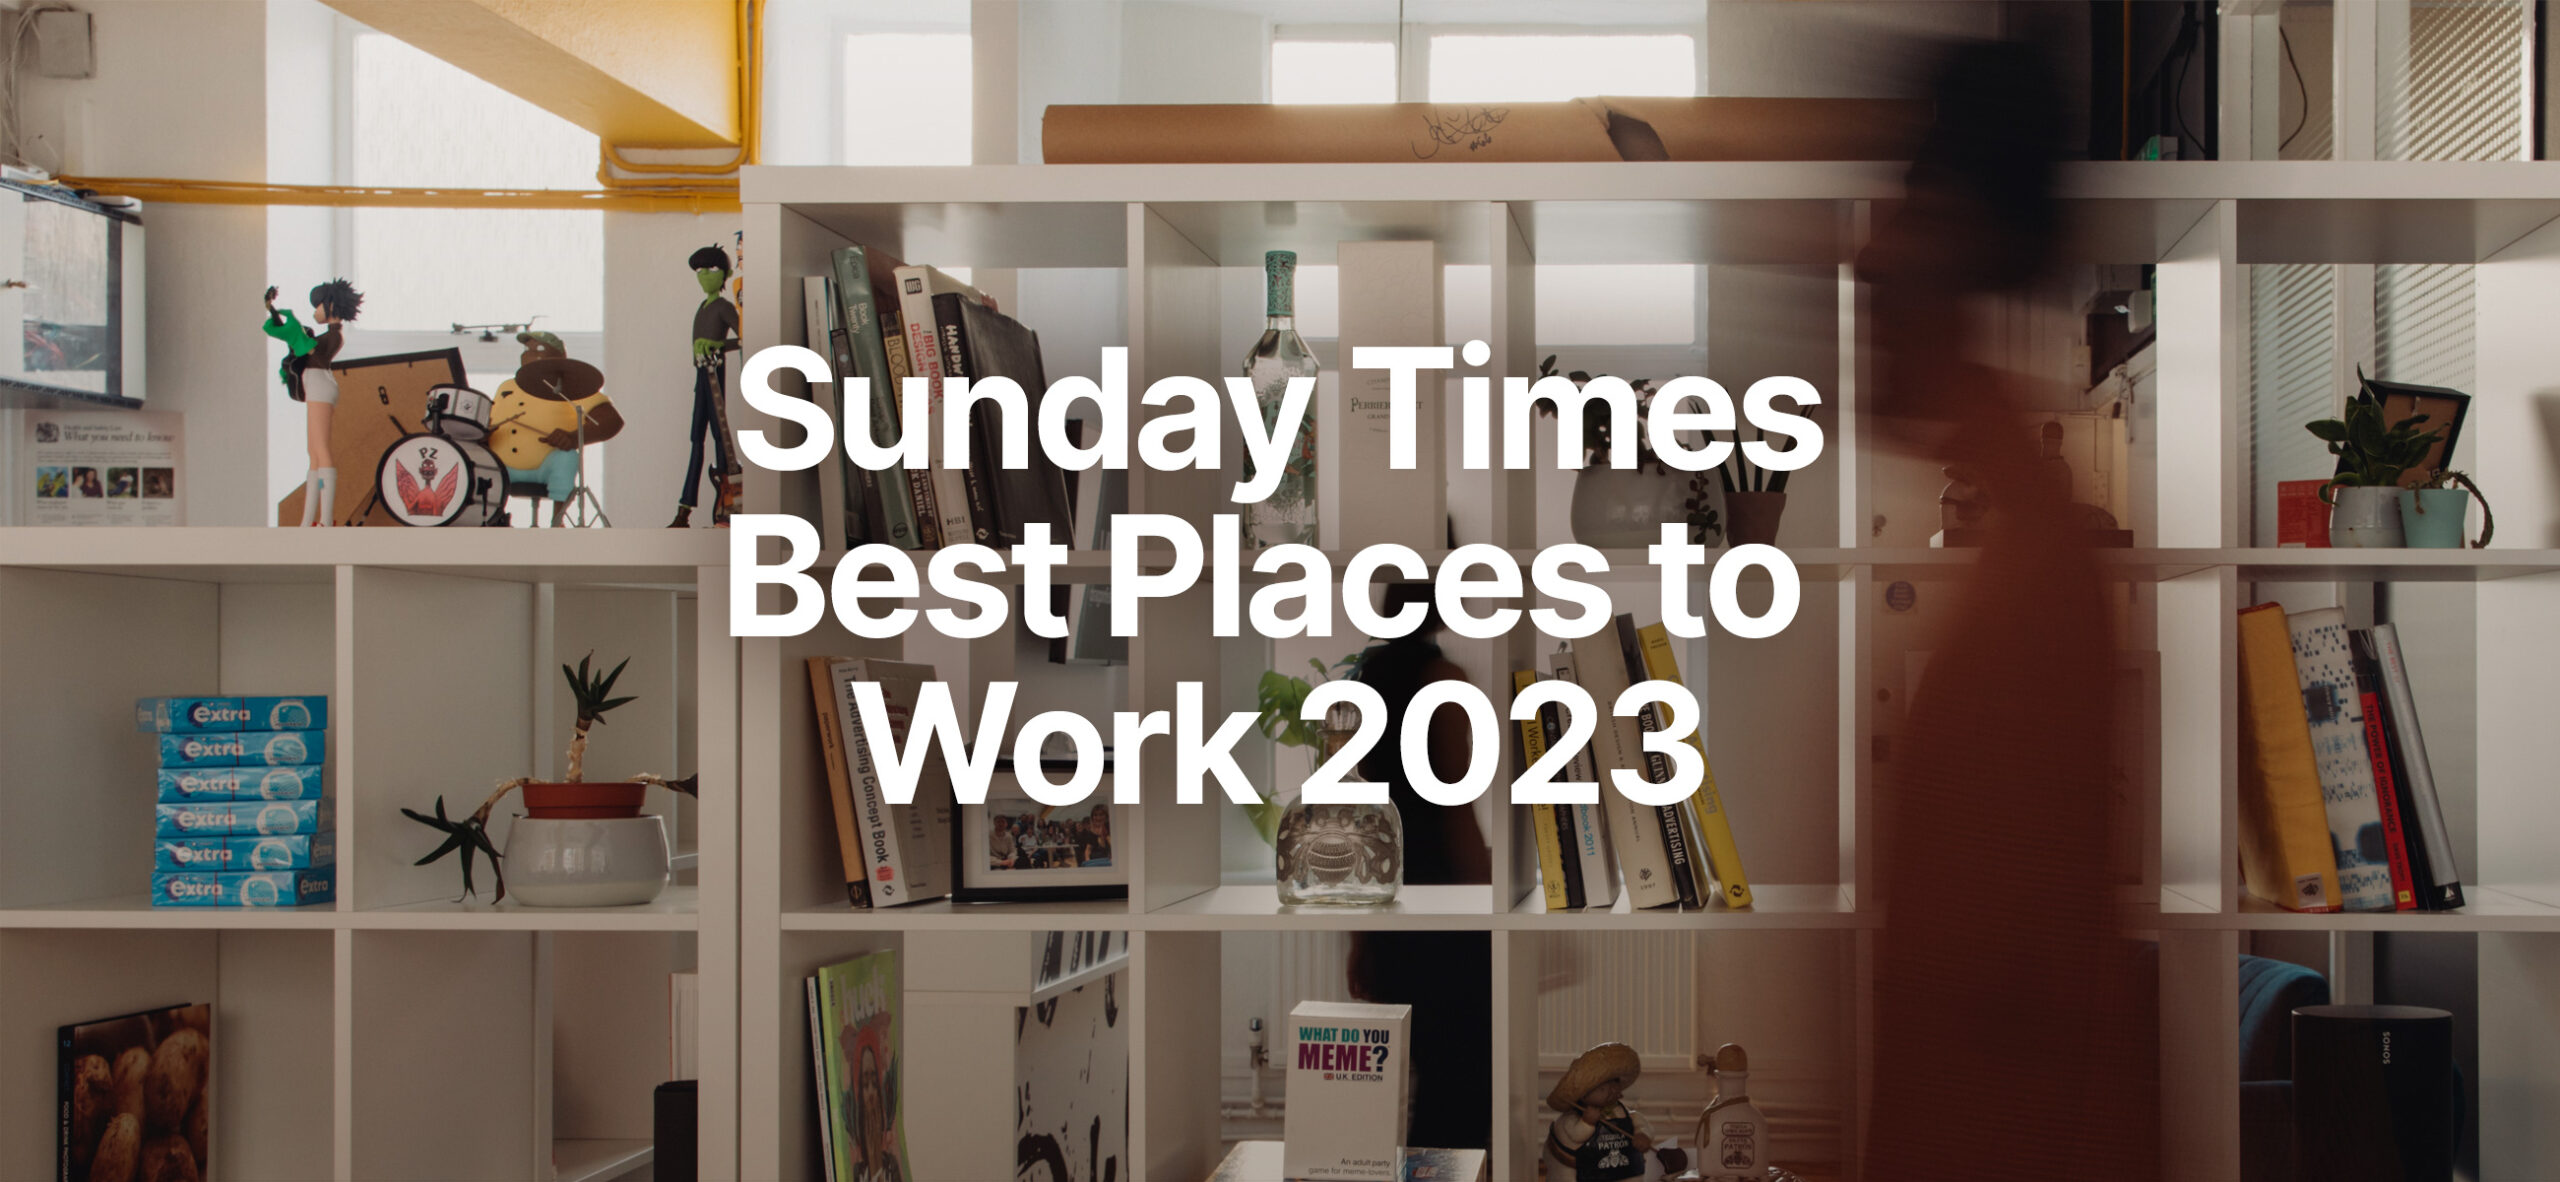 Sunday Times Best Places to Work 2023